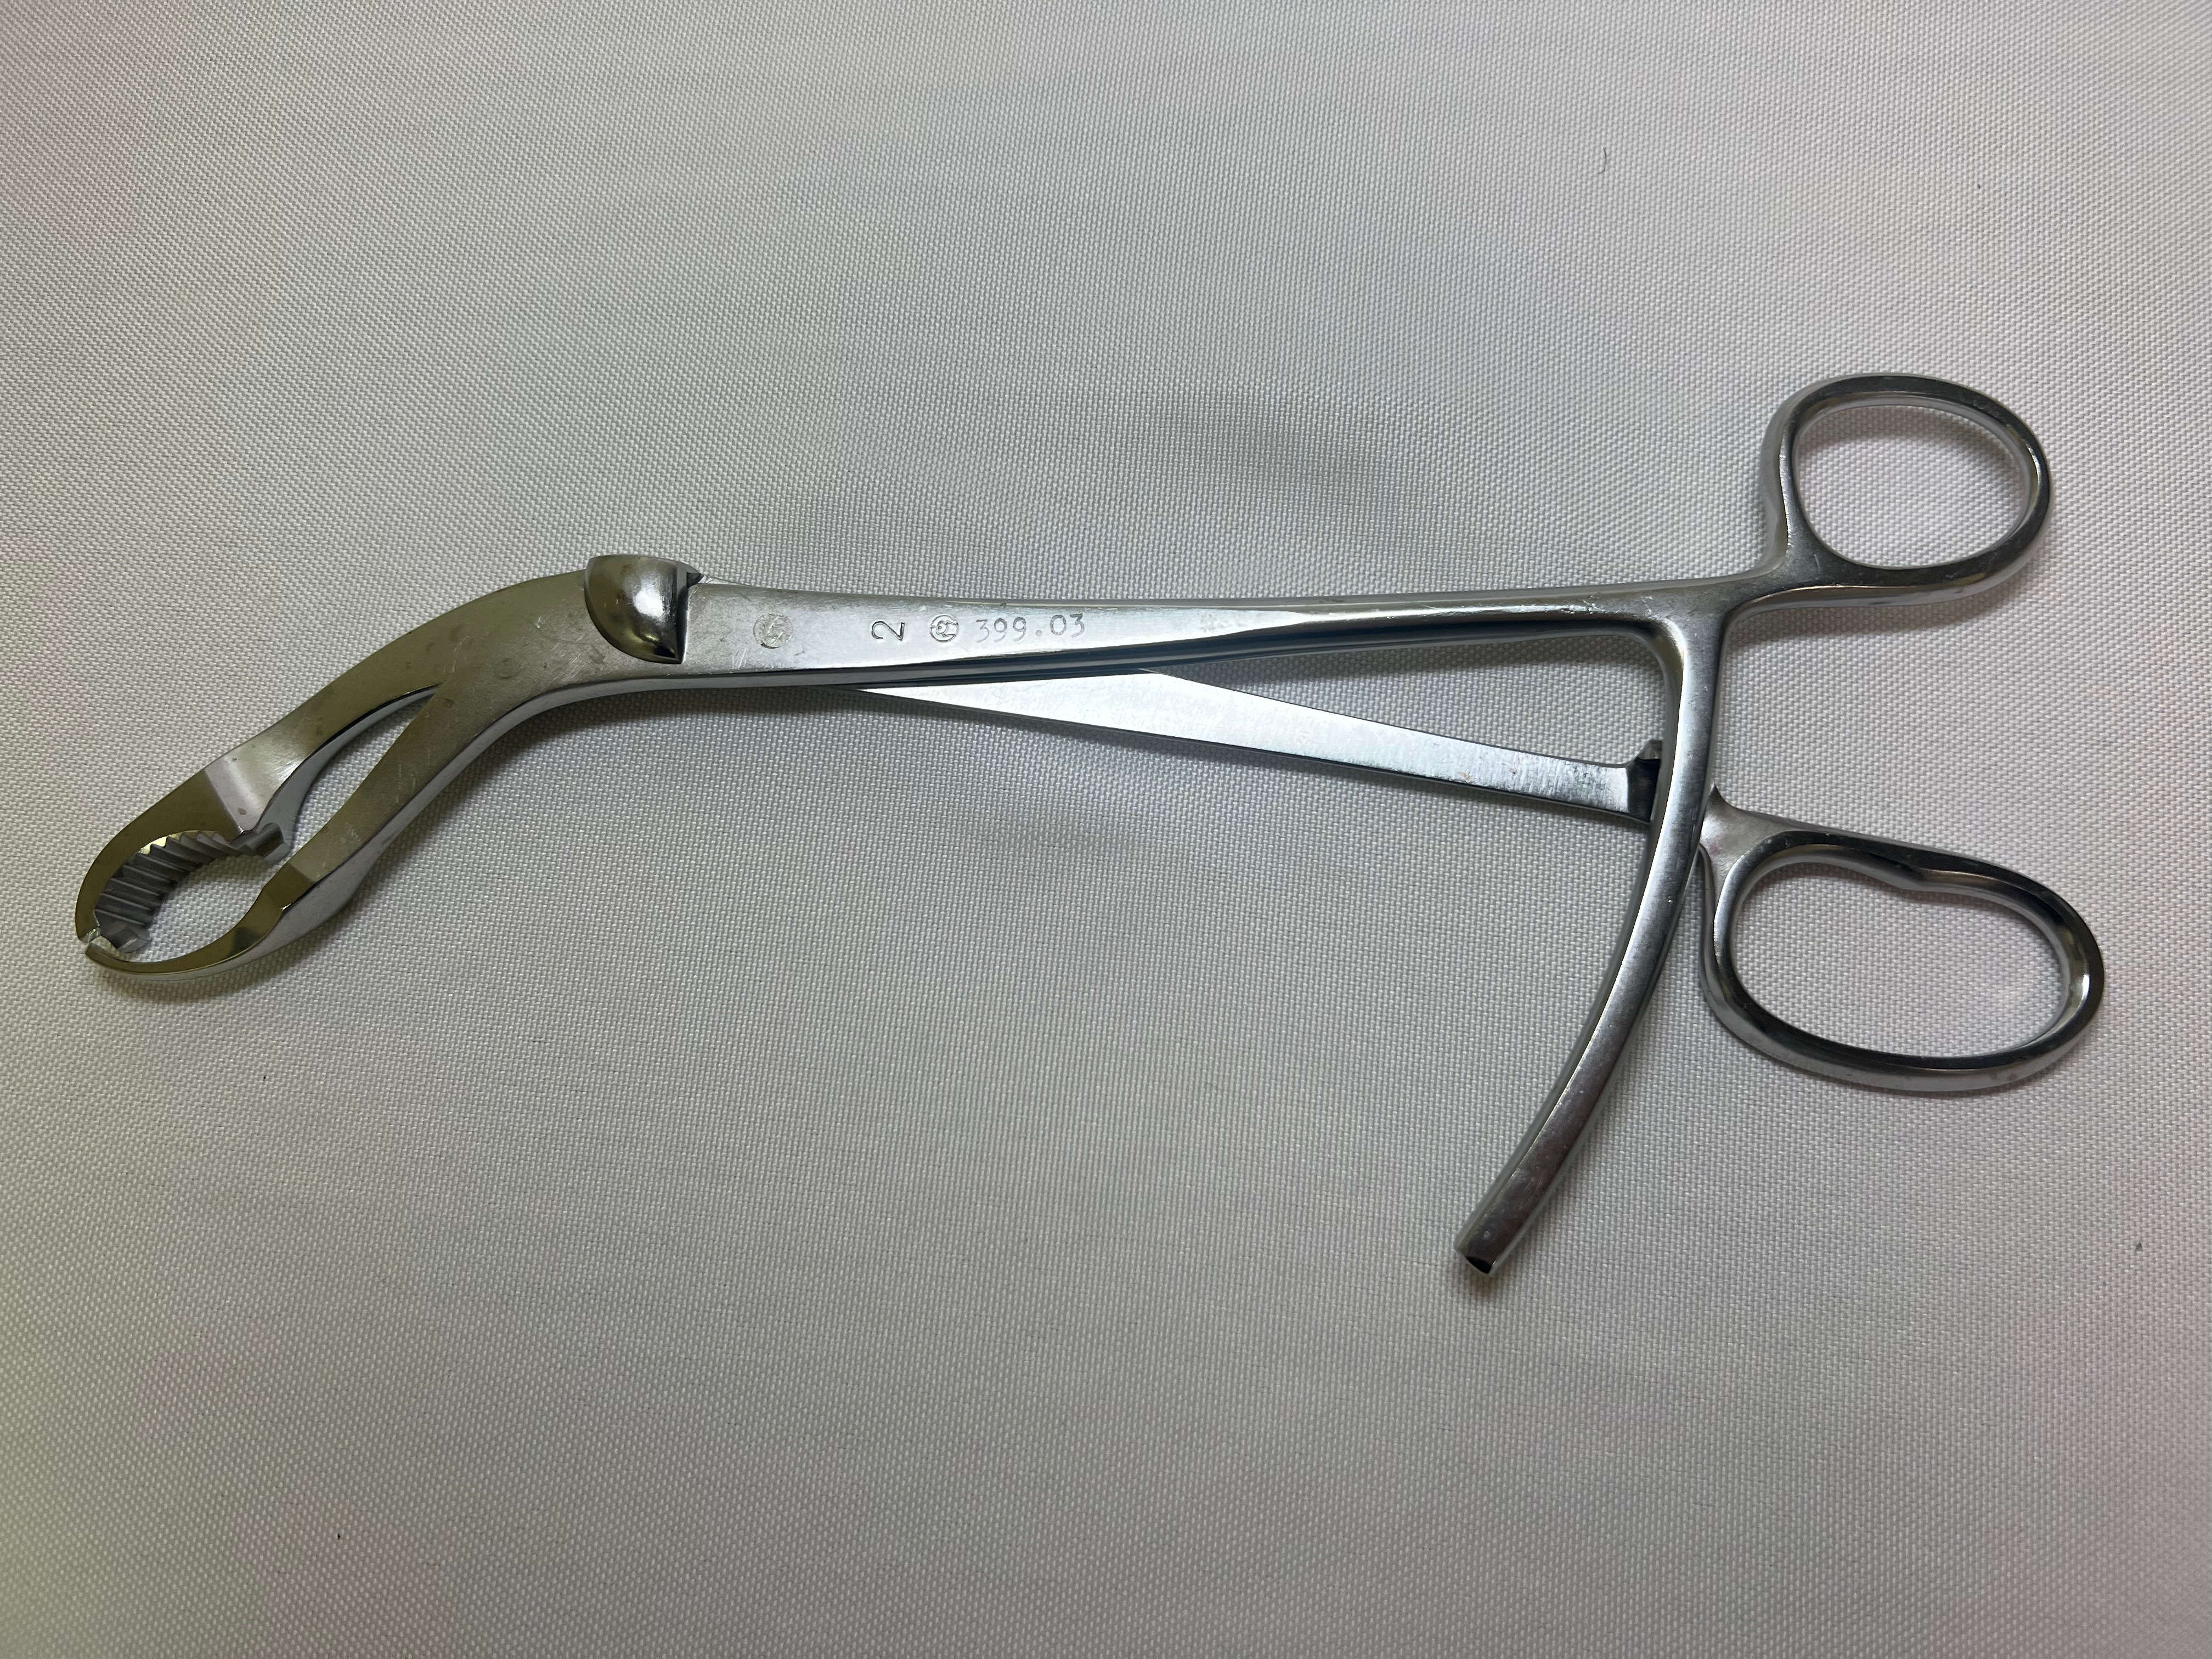 399.03 Reduction Forceps 10-1/4" Length US1158